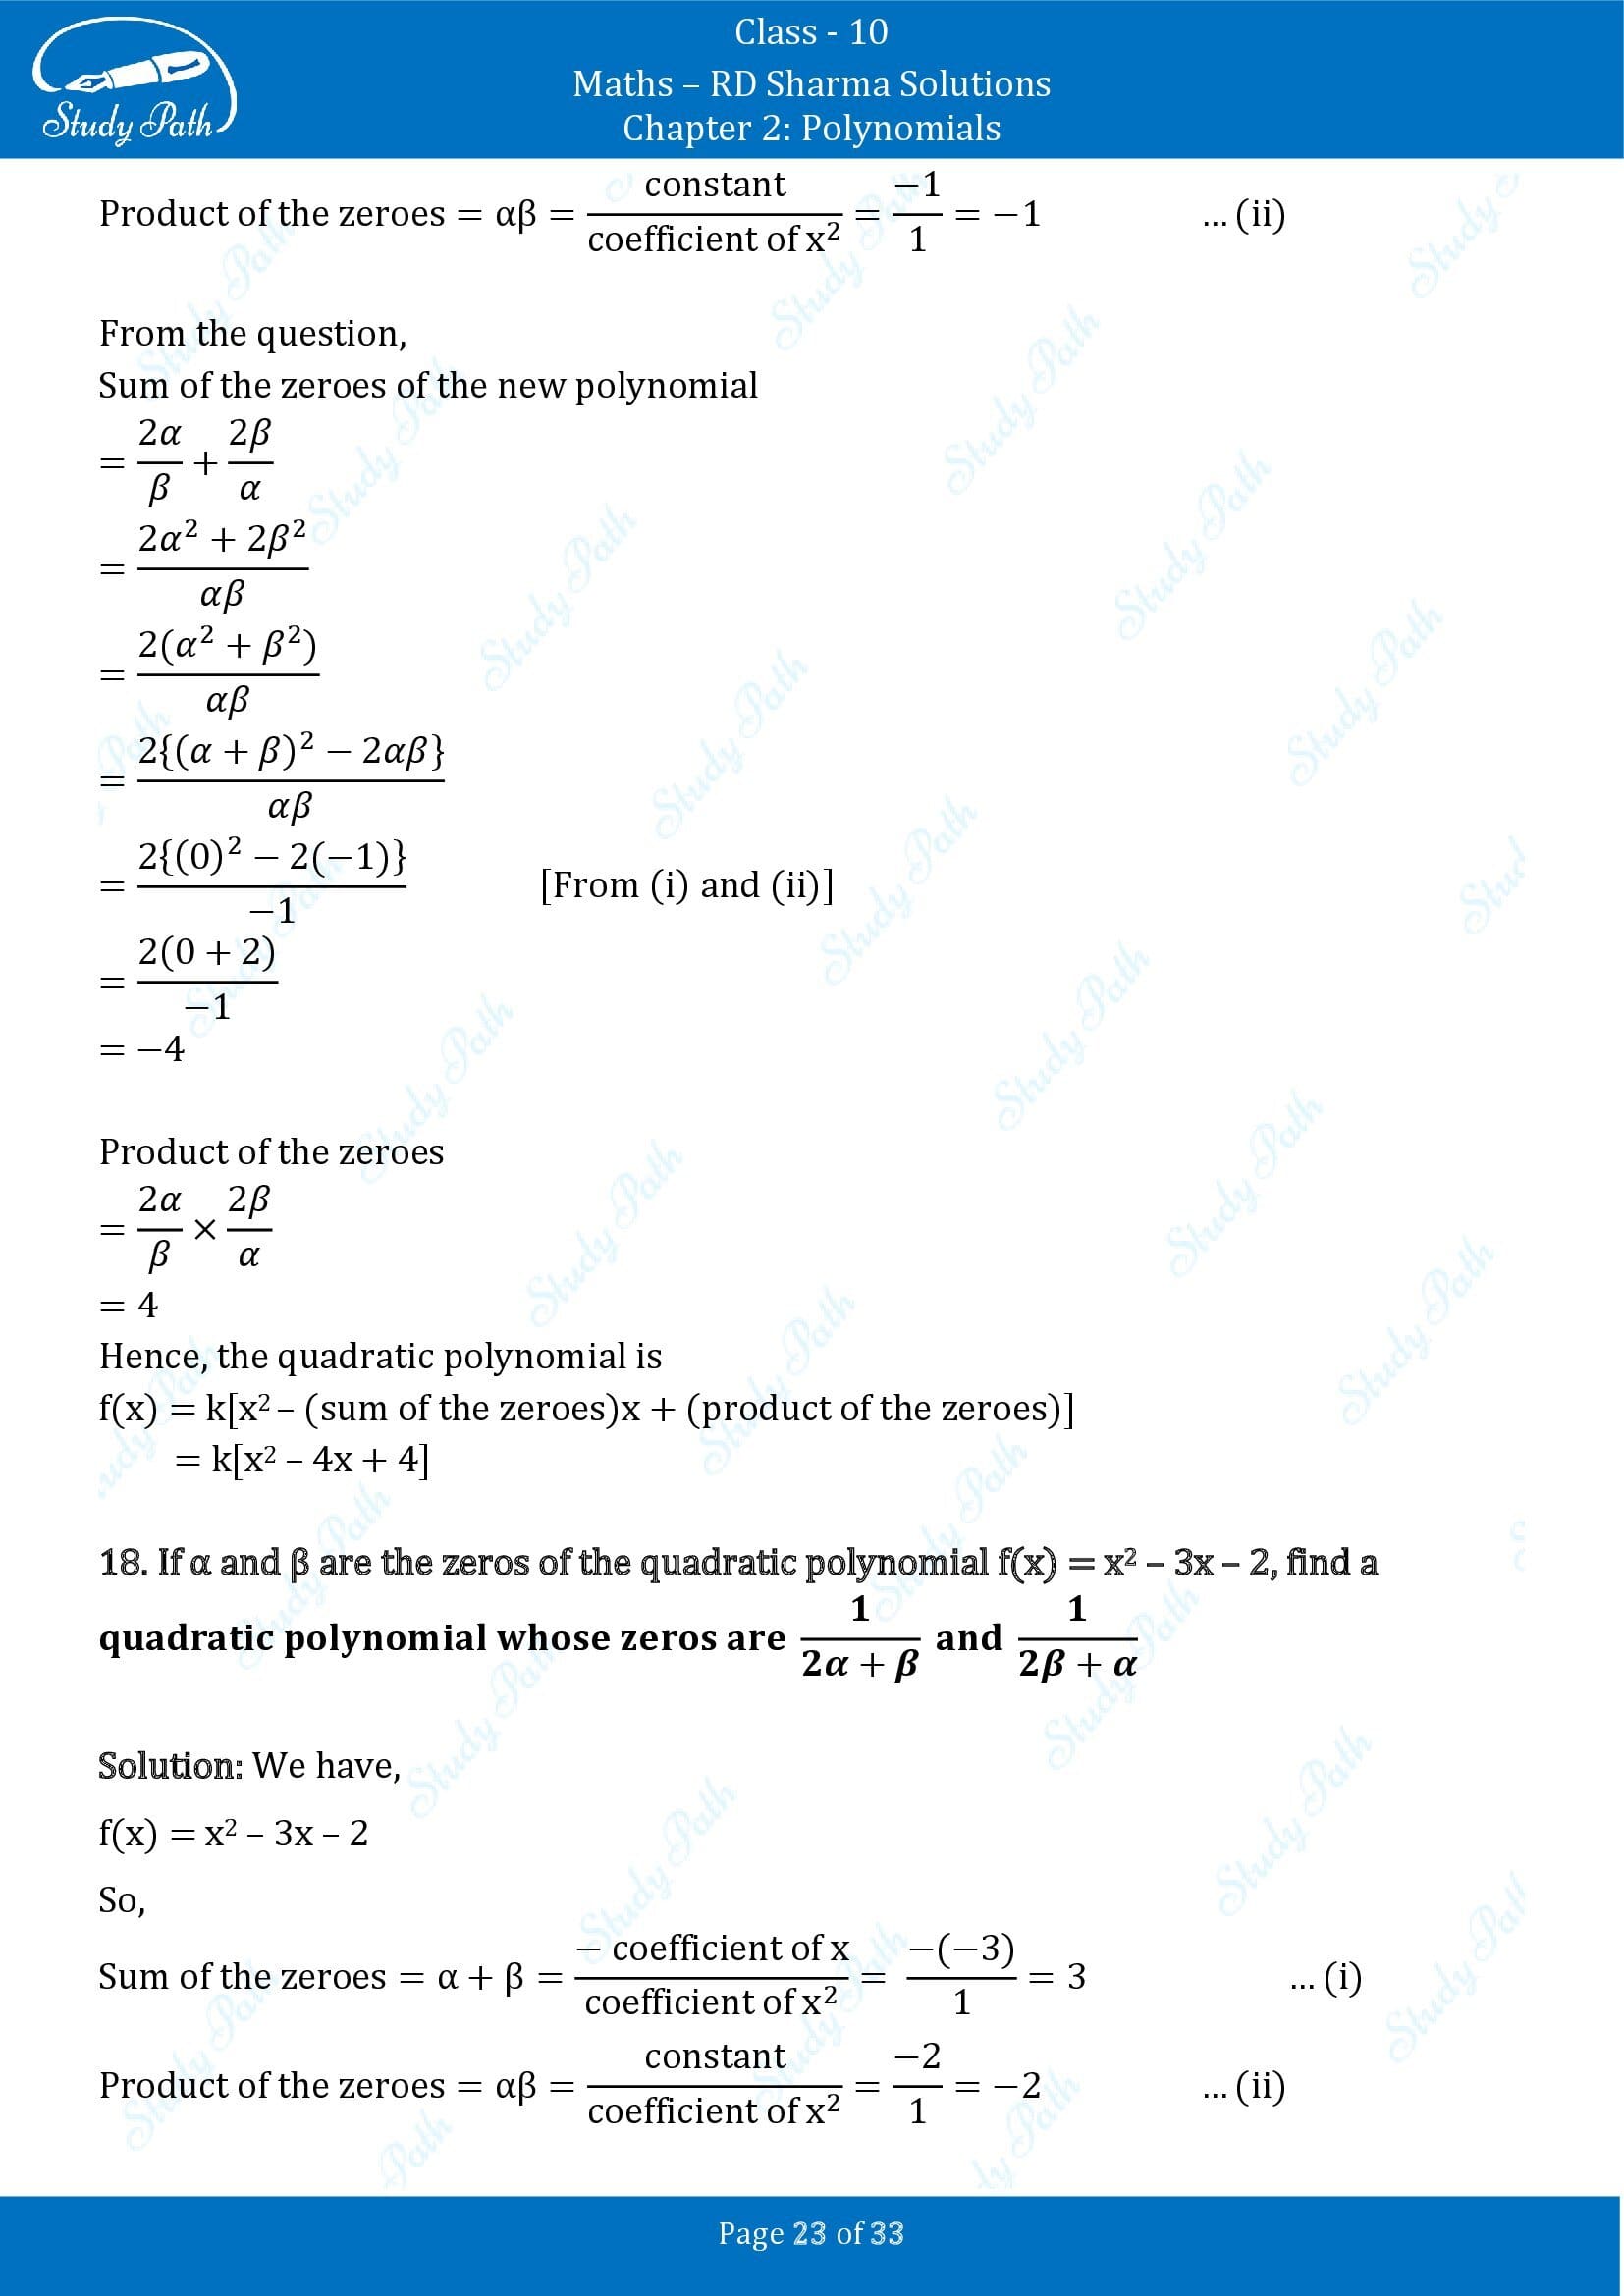 RD Sharma Solutions Class 10 Chapter 2 Polynomials Exercise 2.1 00023